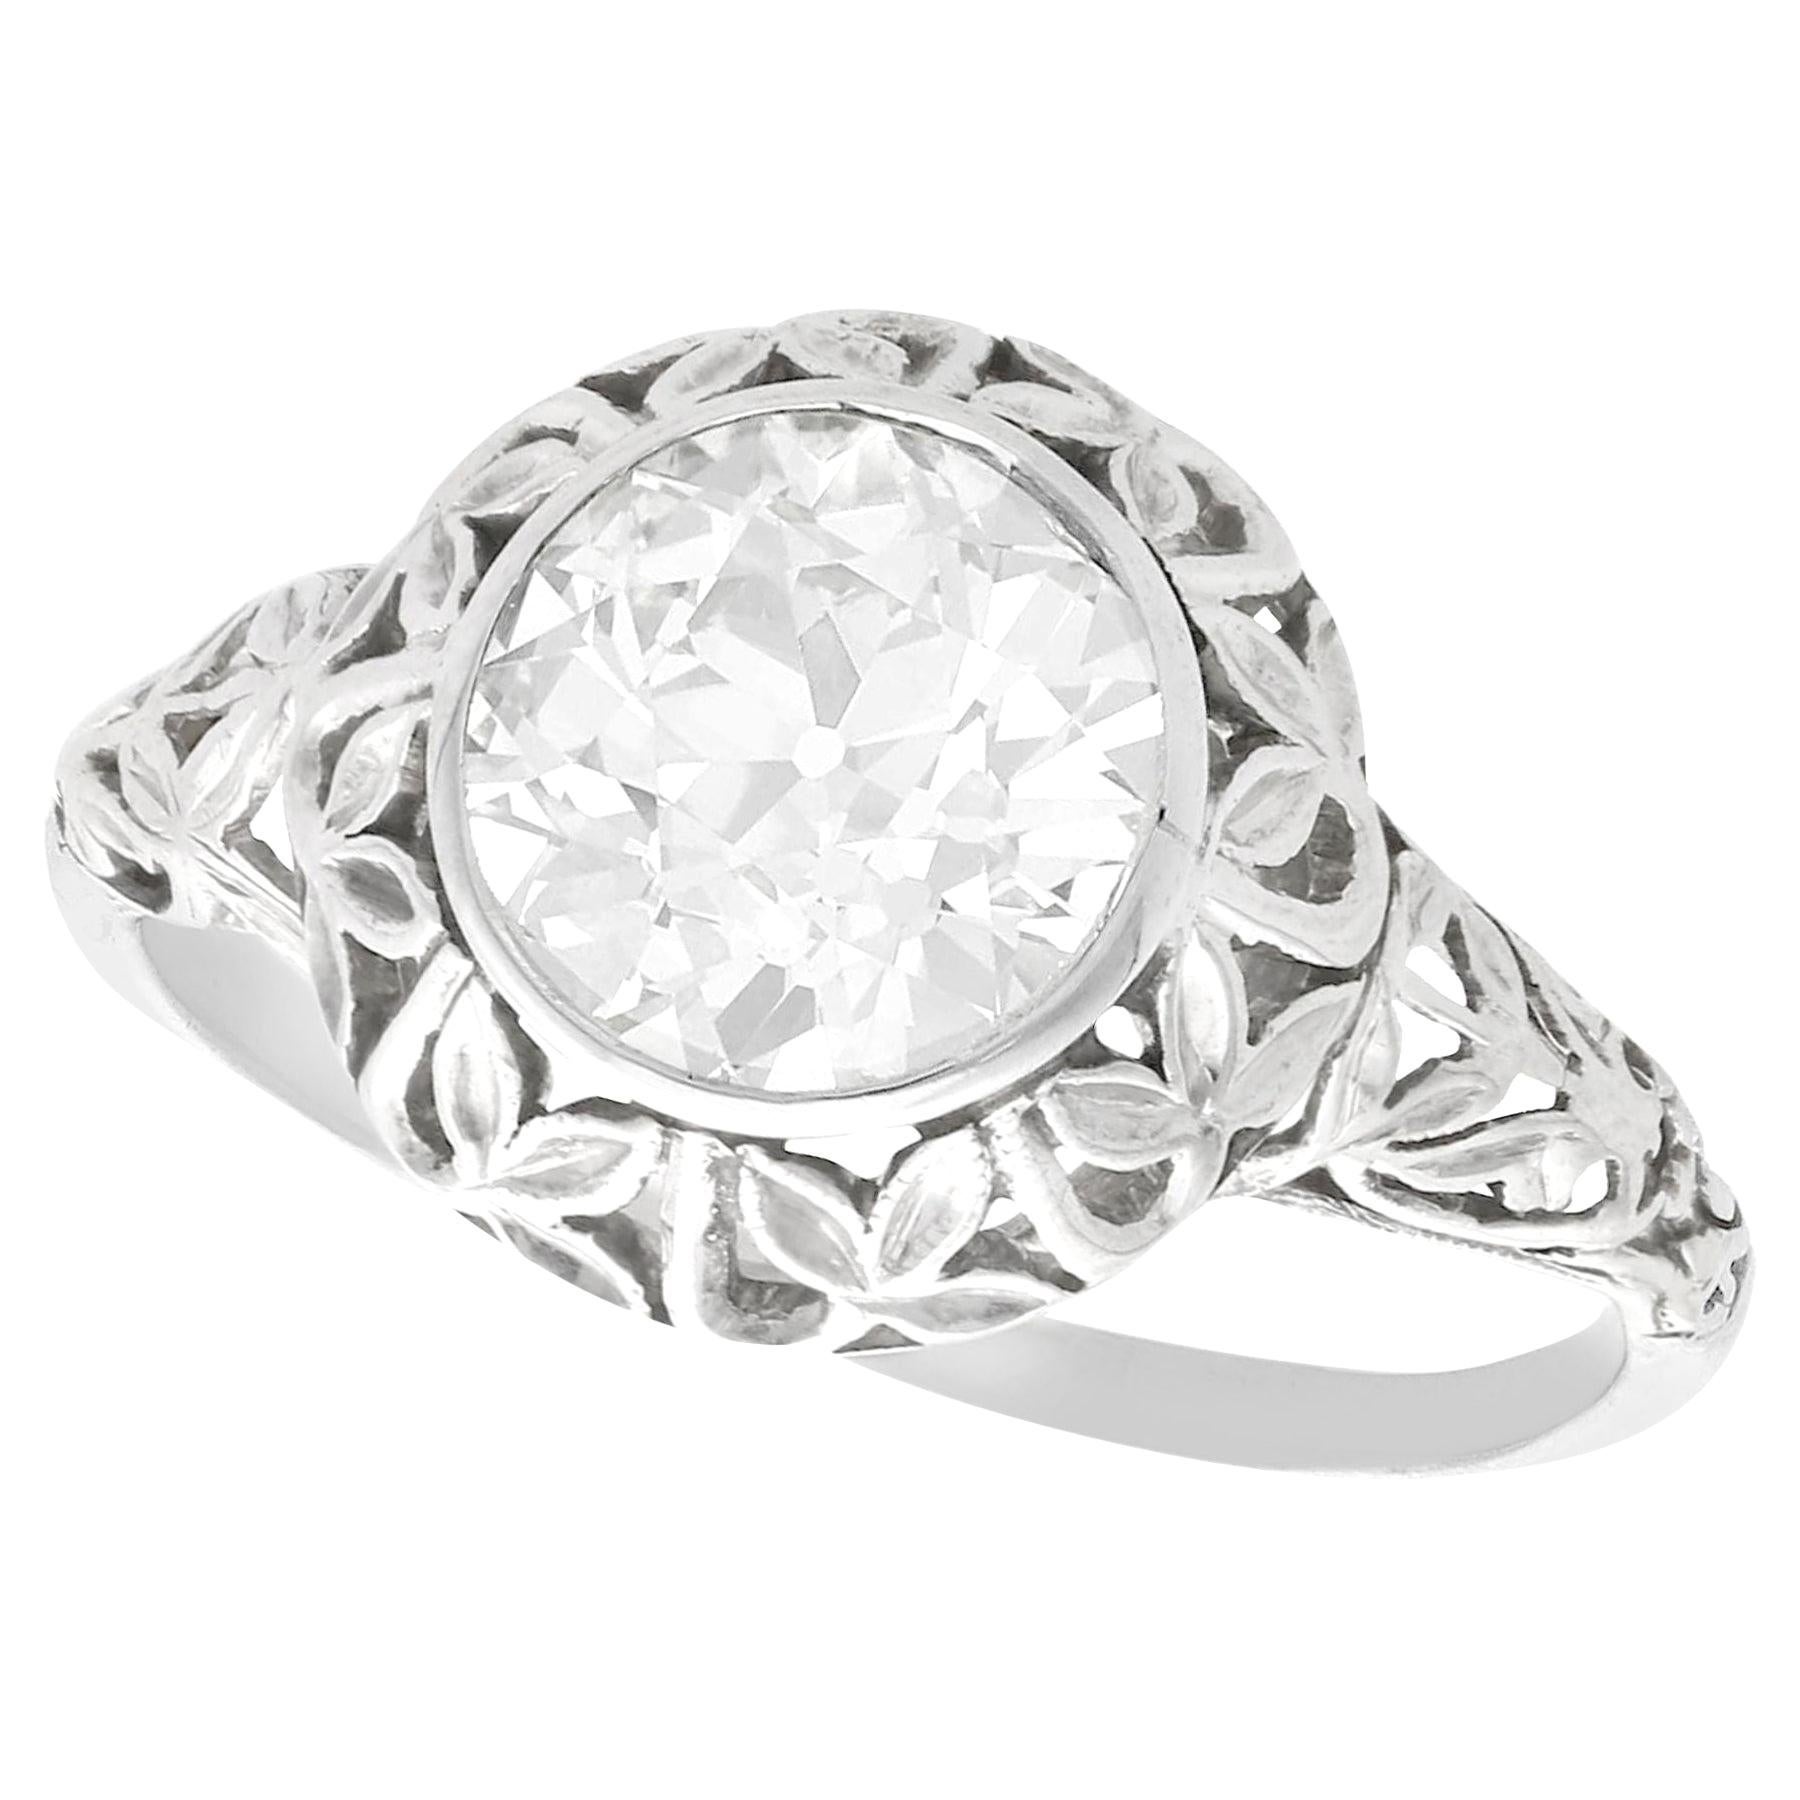 1.70 Carat Diamond and 18 K White Gold Solitaire Ring, Antique circa 1910